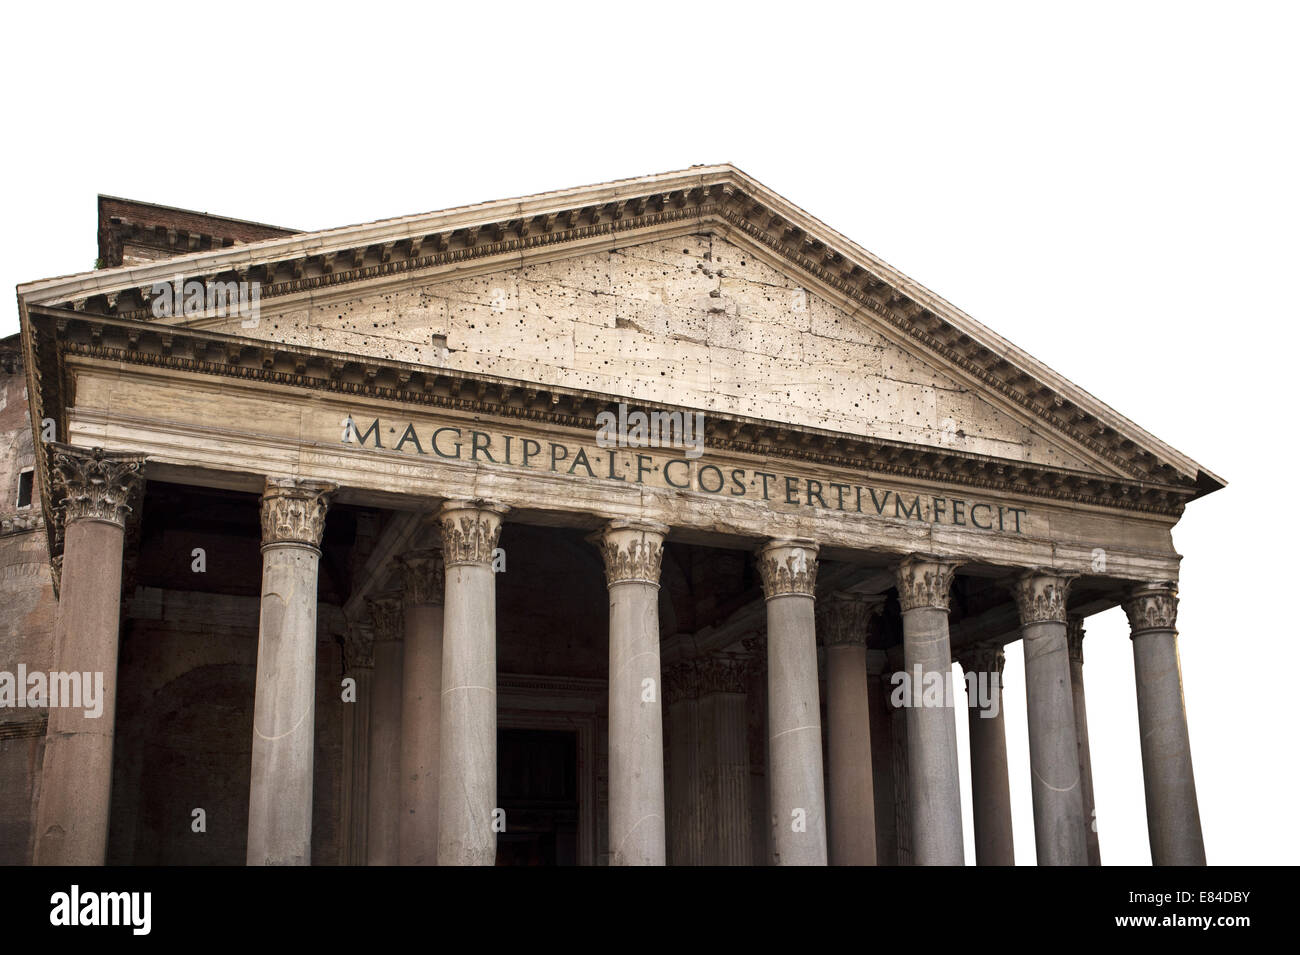 The Pantheon is a building in Rome, Italy, commissioned by Marcus Agrippa during the reign of Augustus (27 BC - 14 AD) and rebui Stock Photo